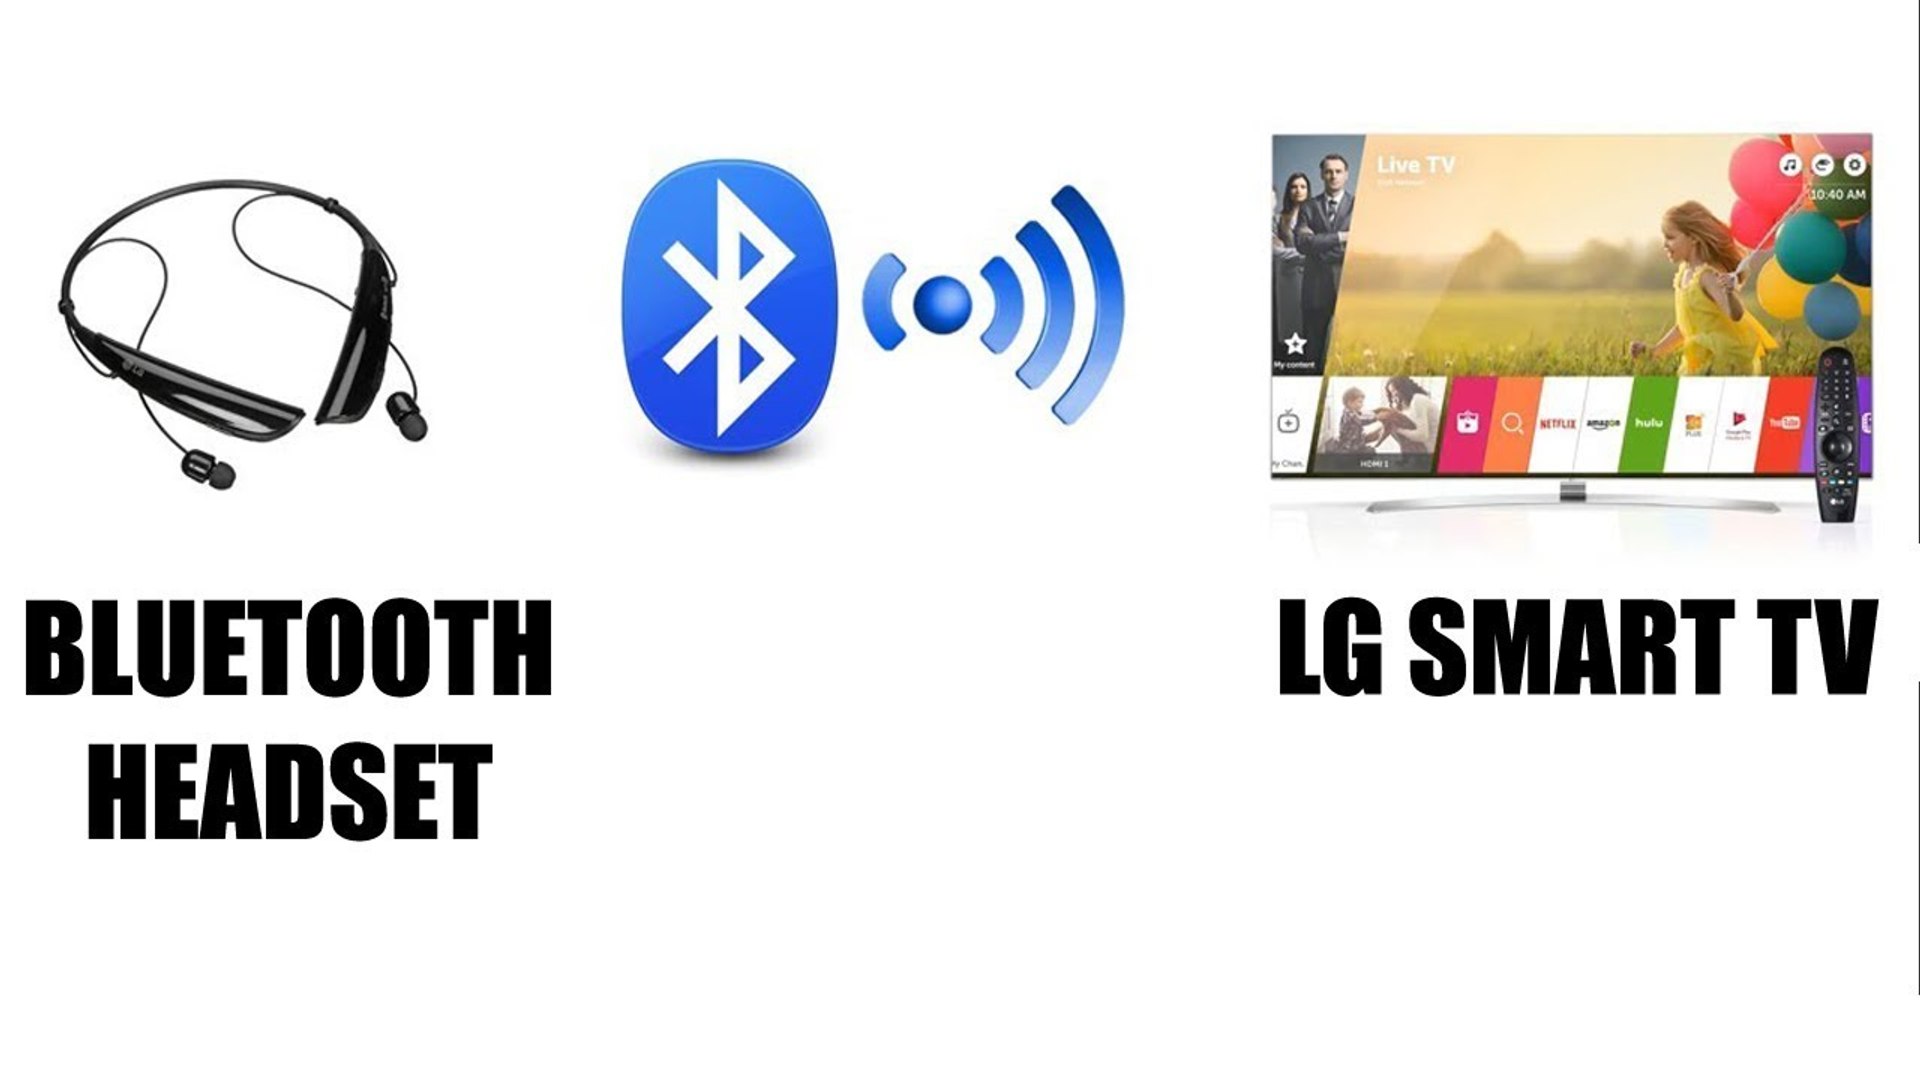 How To Connect A Bluetooth Headset Headphone With Lg Smart Tv Uhd 4k Video Xolent Productions Video Dailymotion